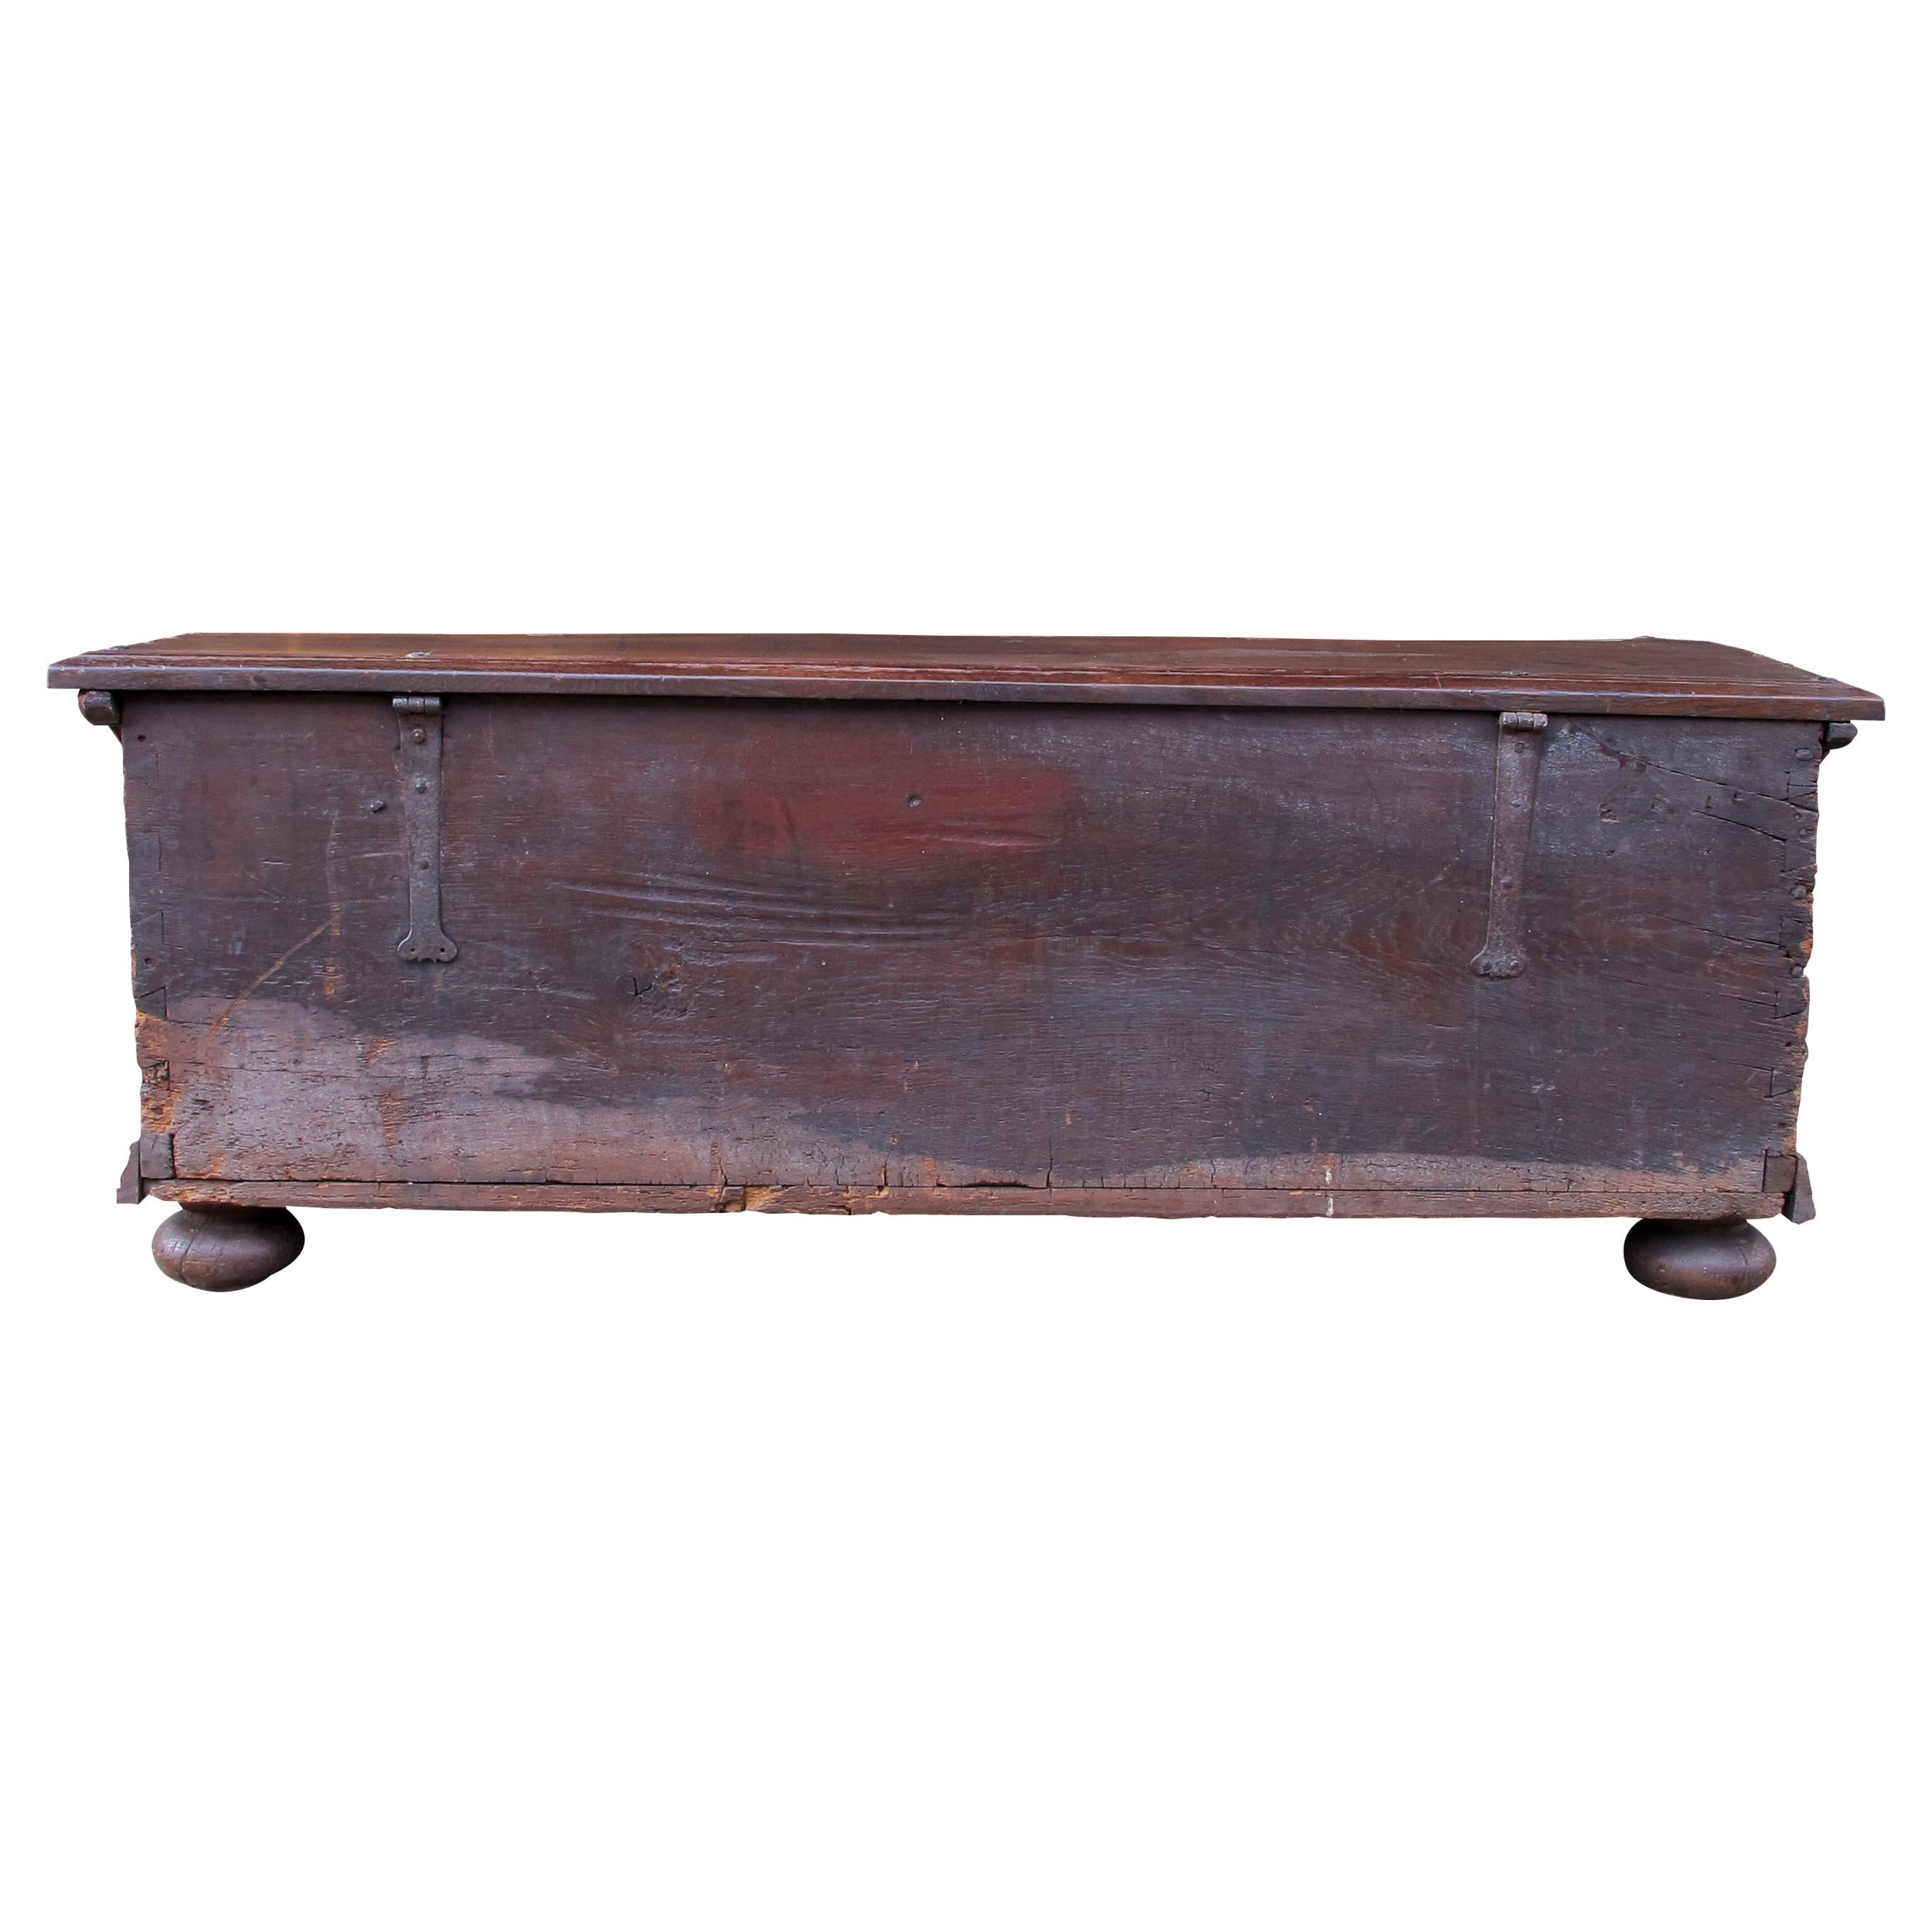 Late 18th Century Early 18th Century Large Marriage Oak Trunk With a Vaulted Lid and Carvings For Sale